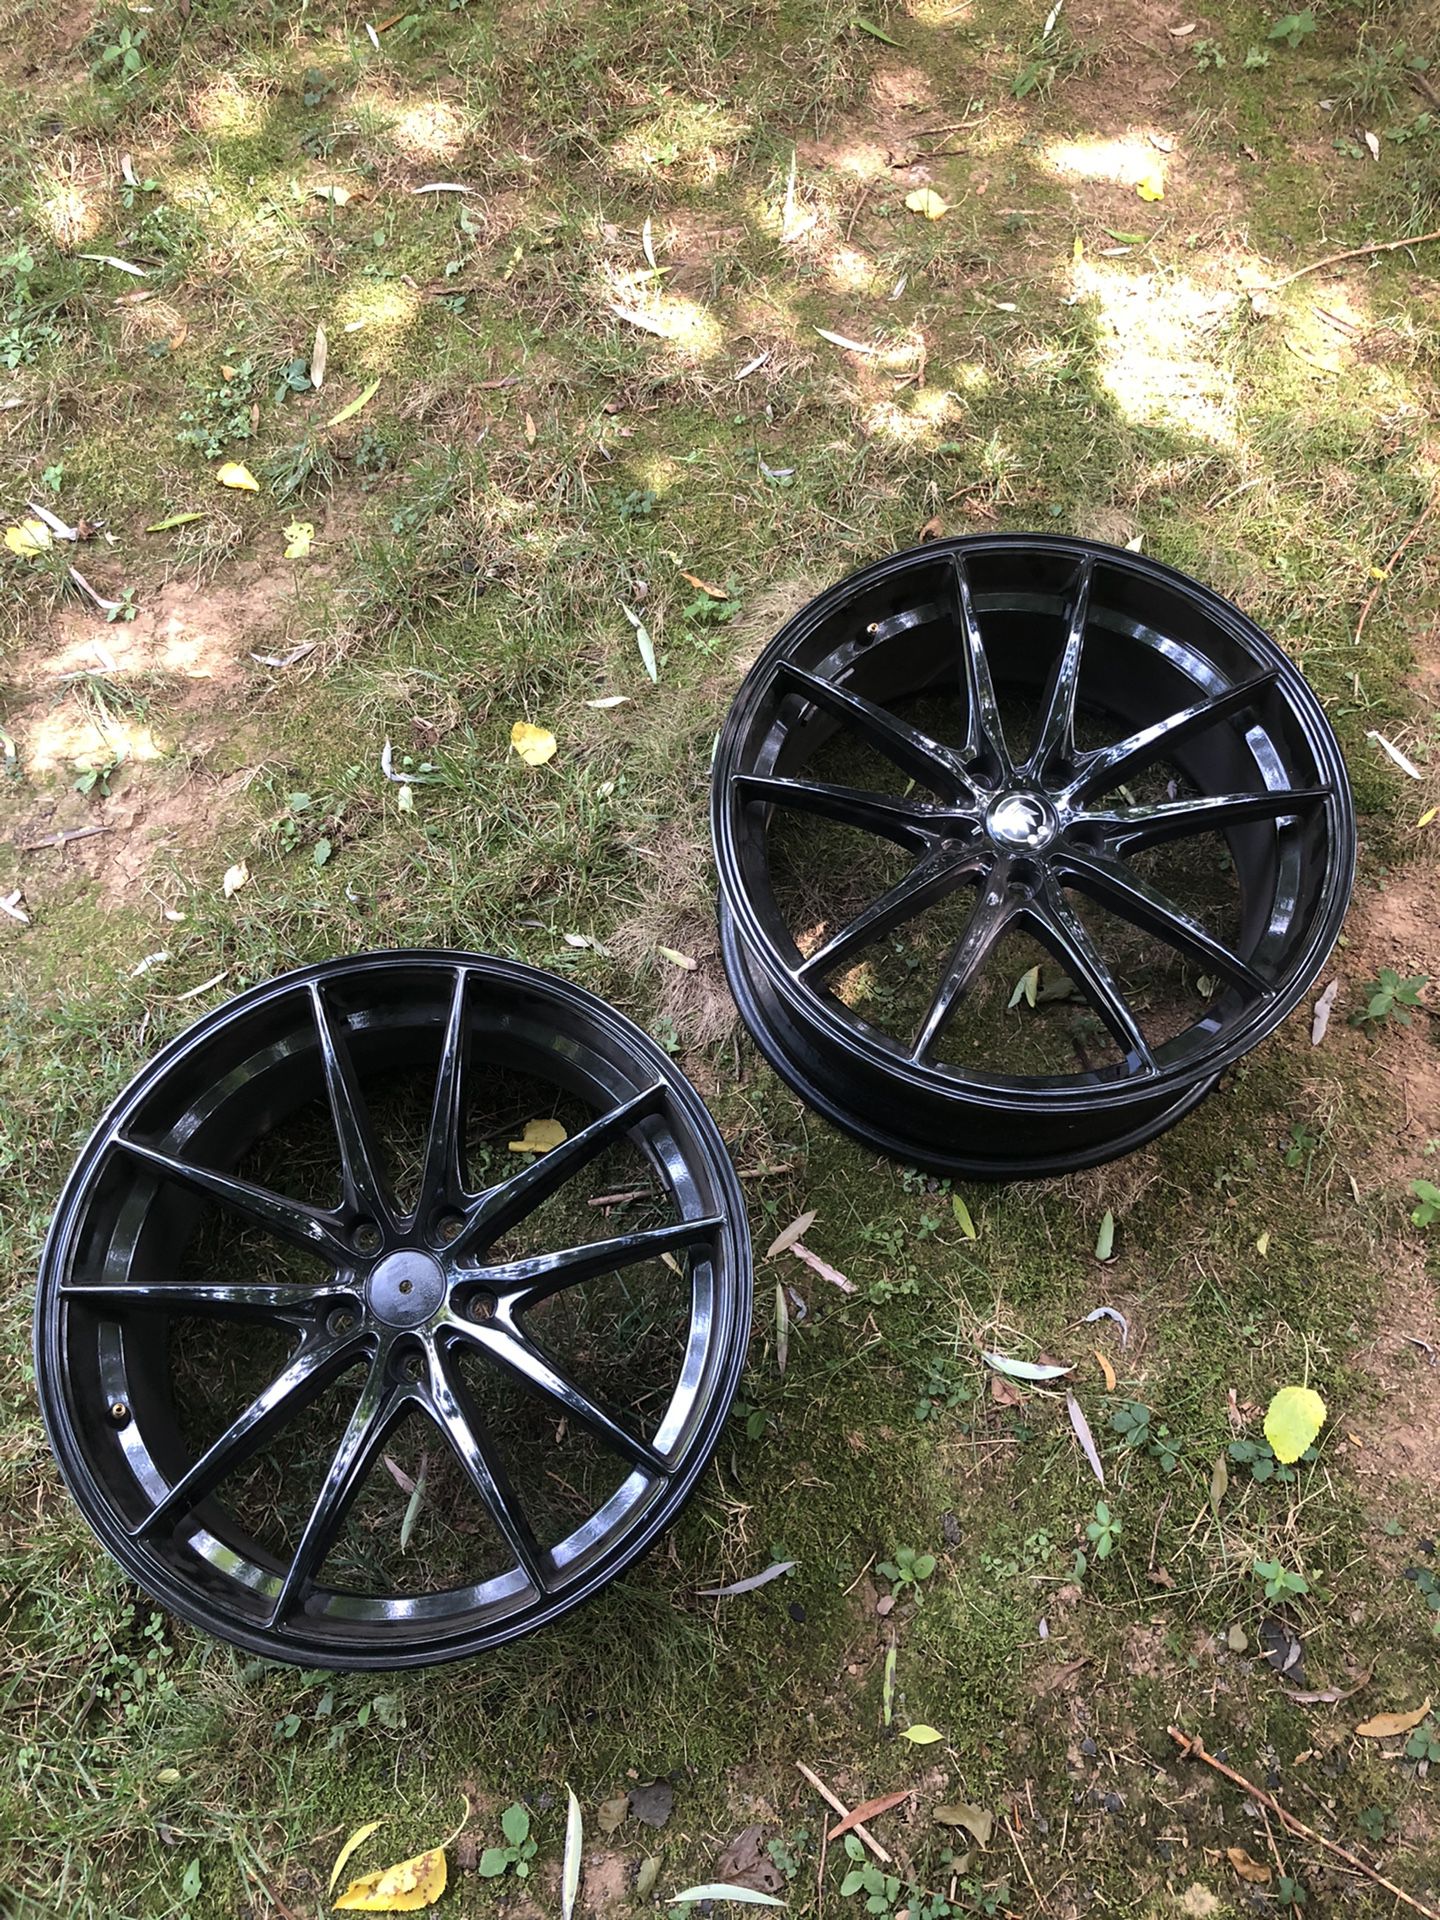 4 Gloss Black Konig Wheels (2 of them are in tires)